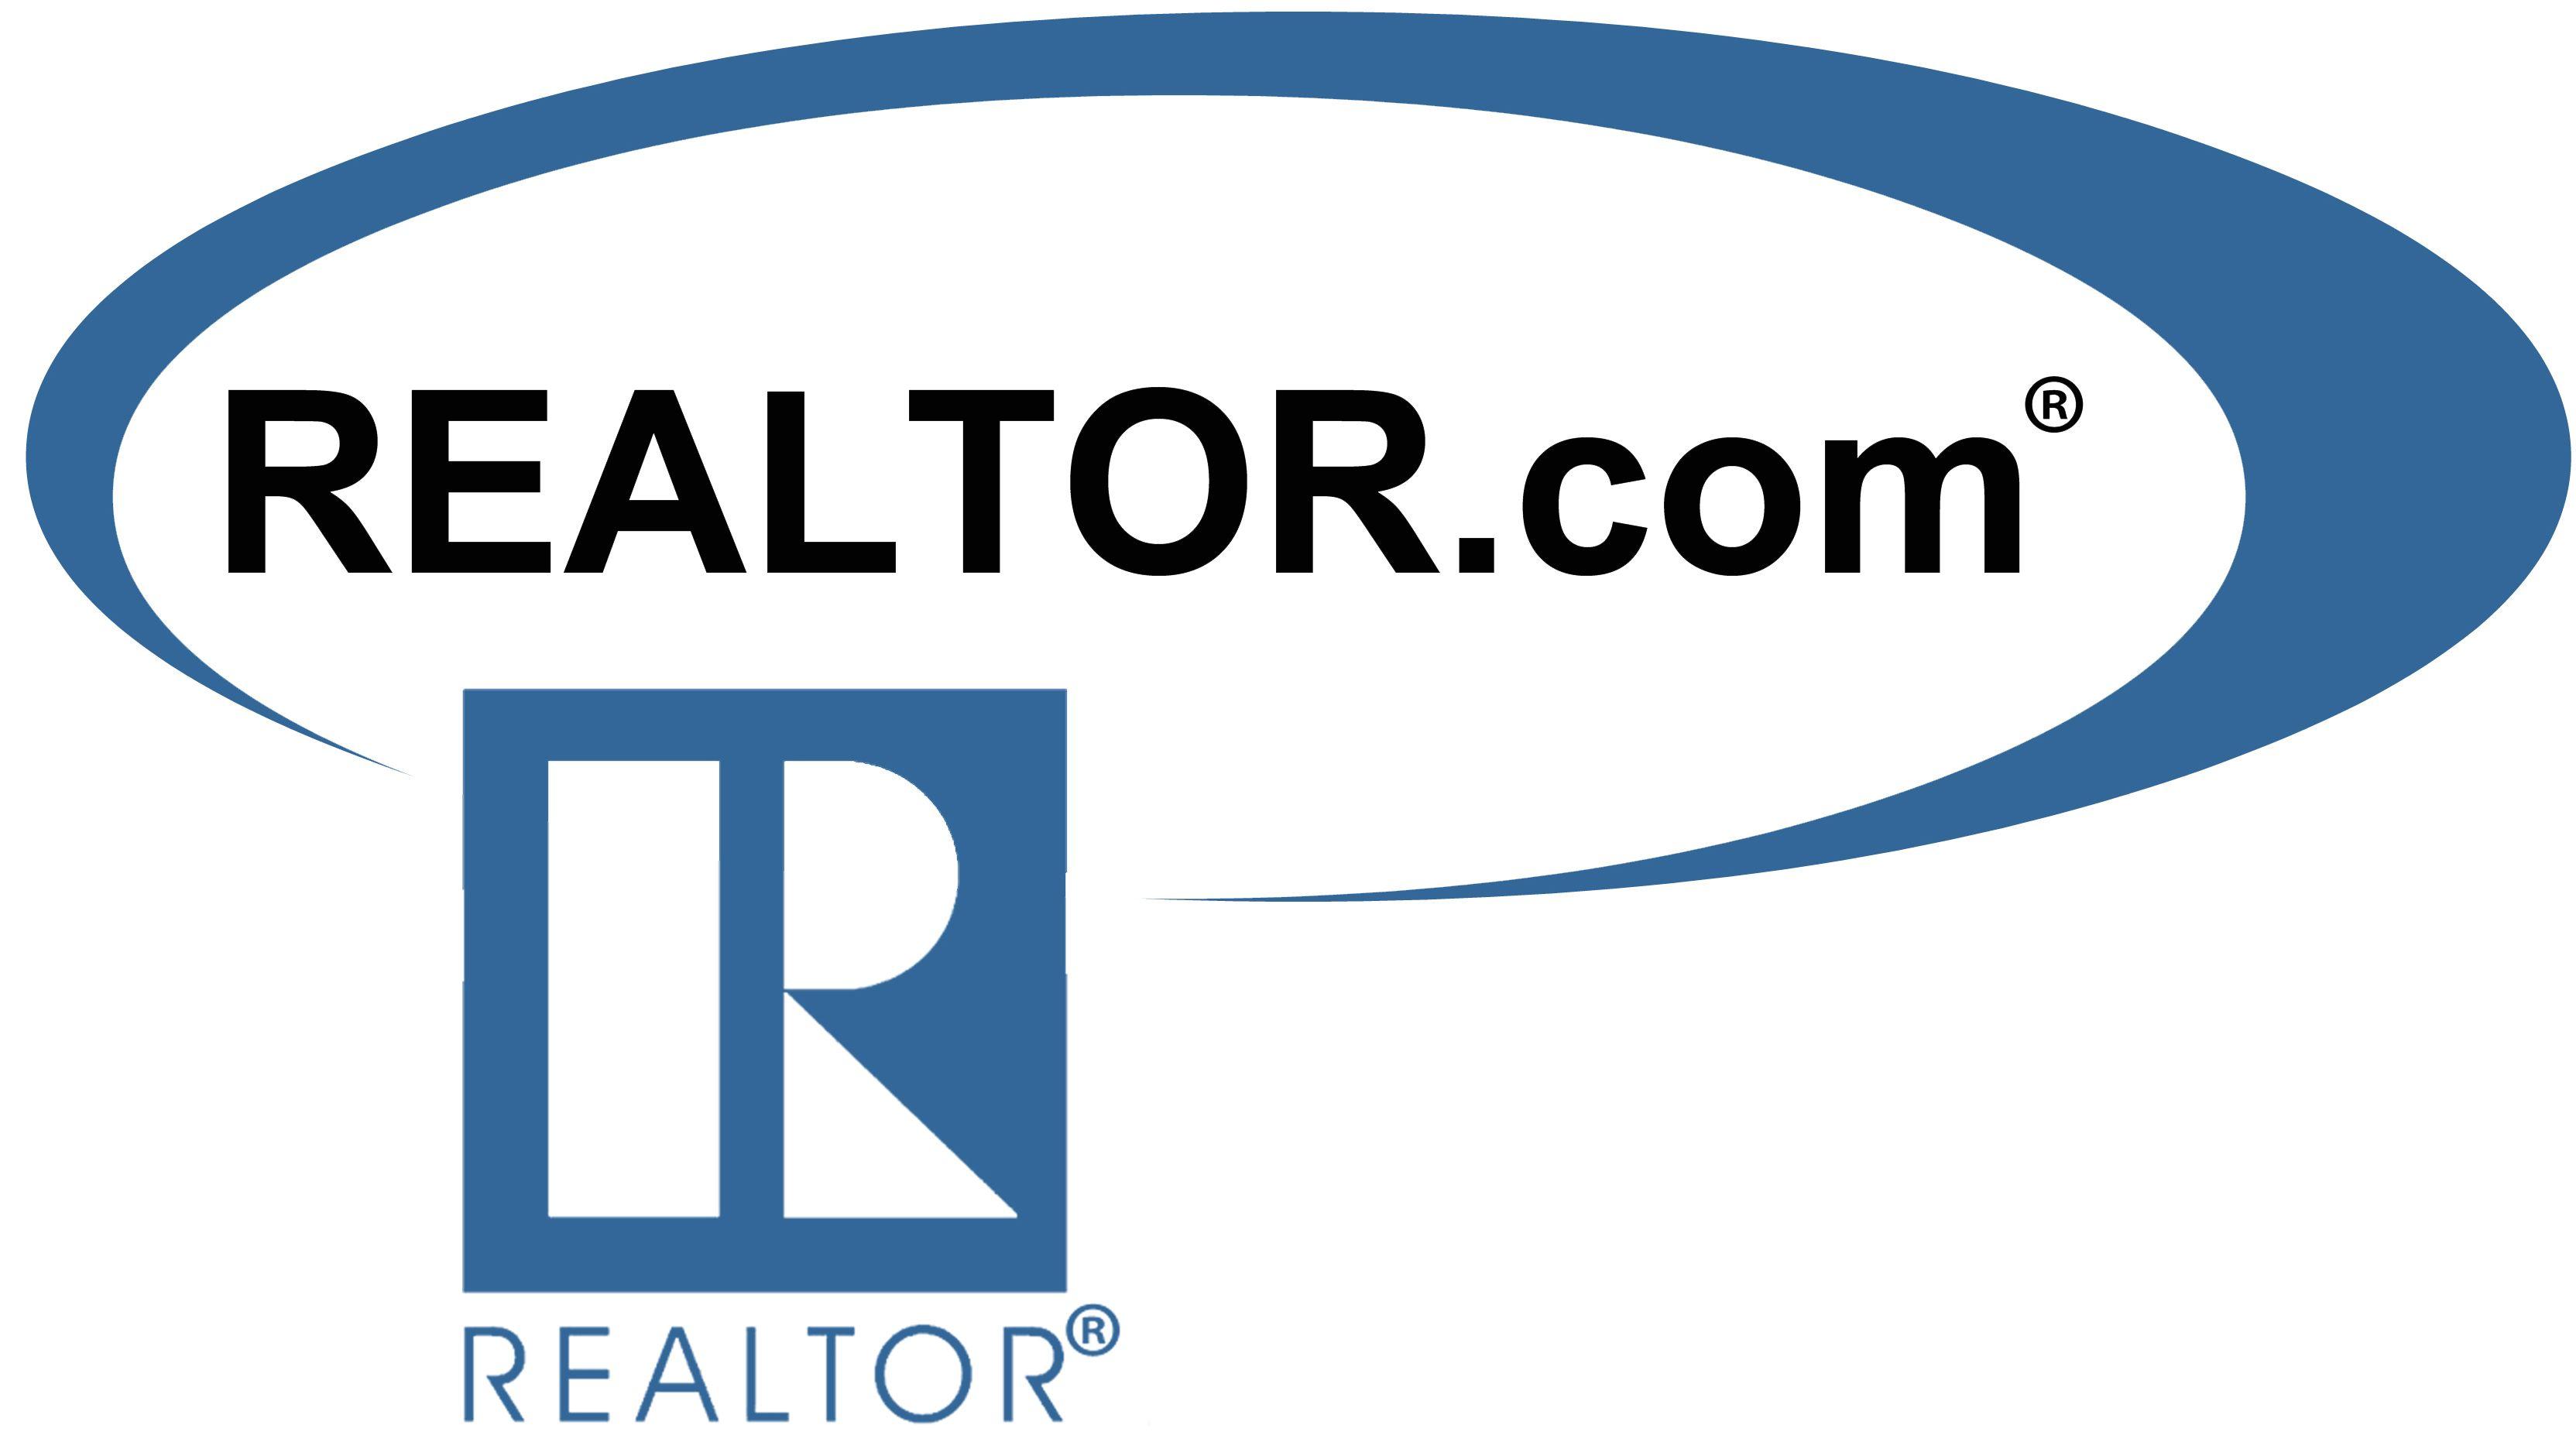 Www.realtor.com Logo - Realtor.com Logo Png (91+ images in Collection) Page 2